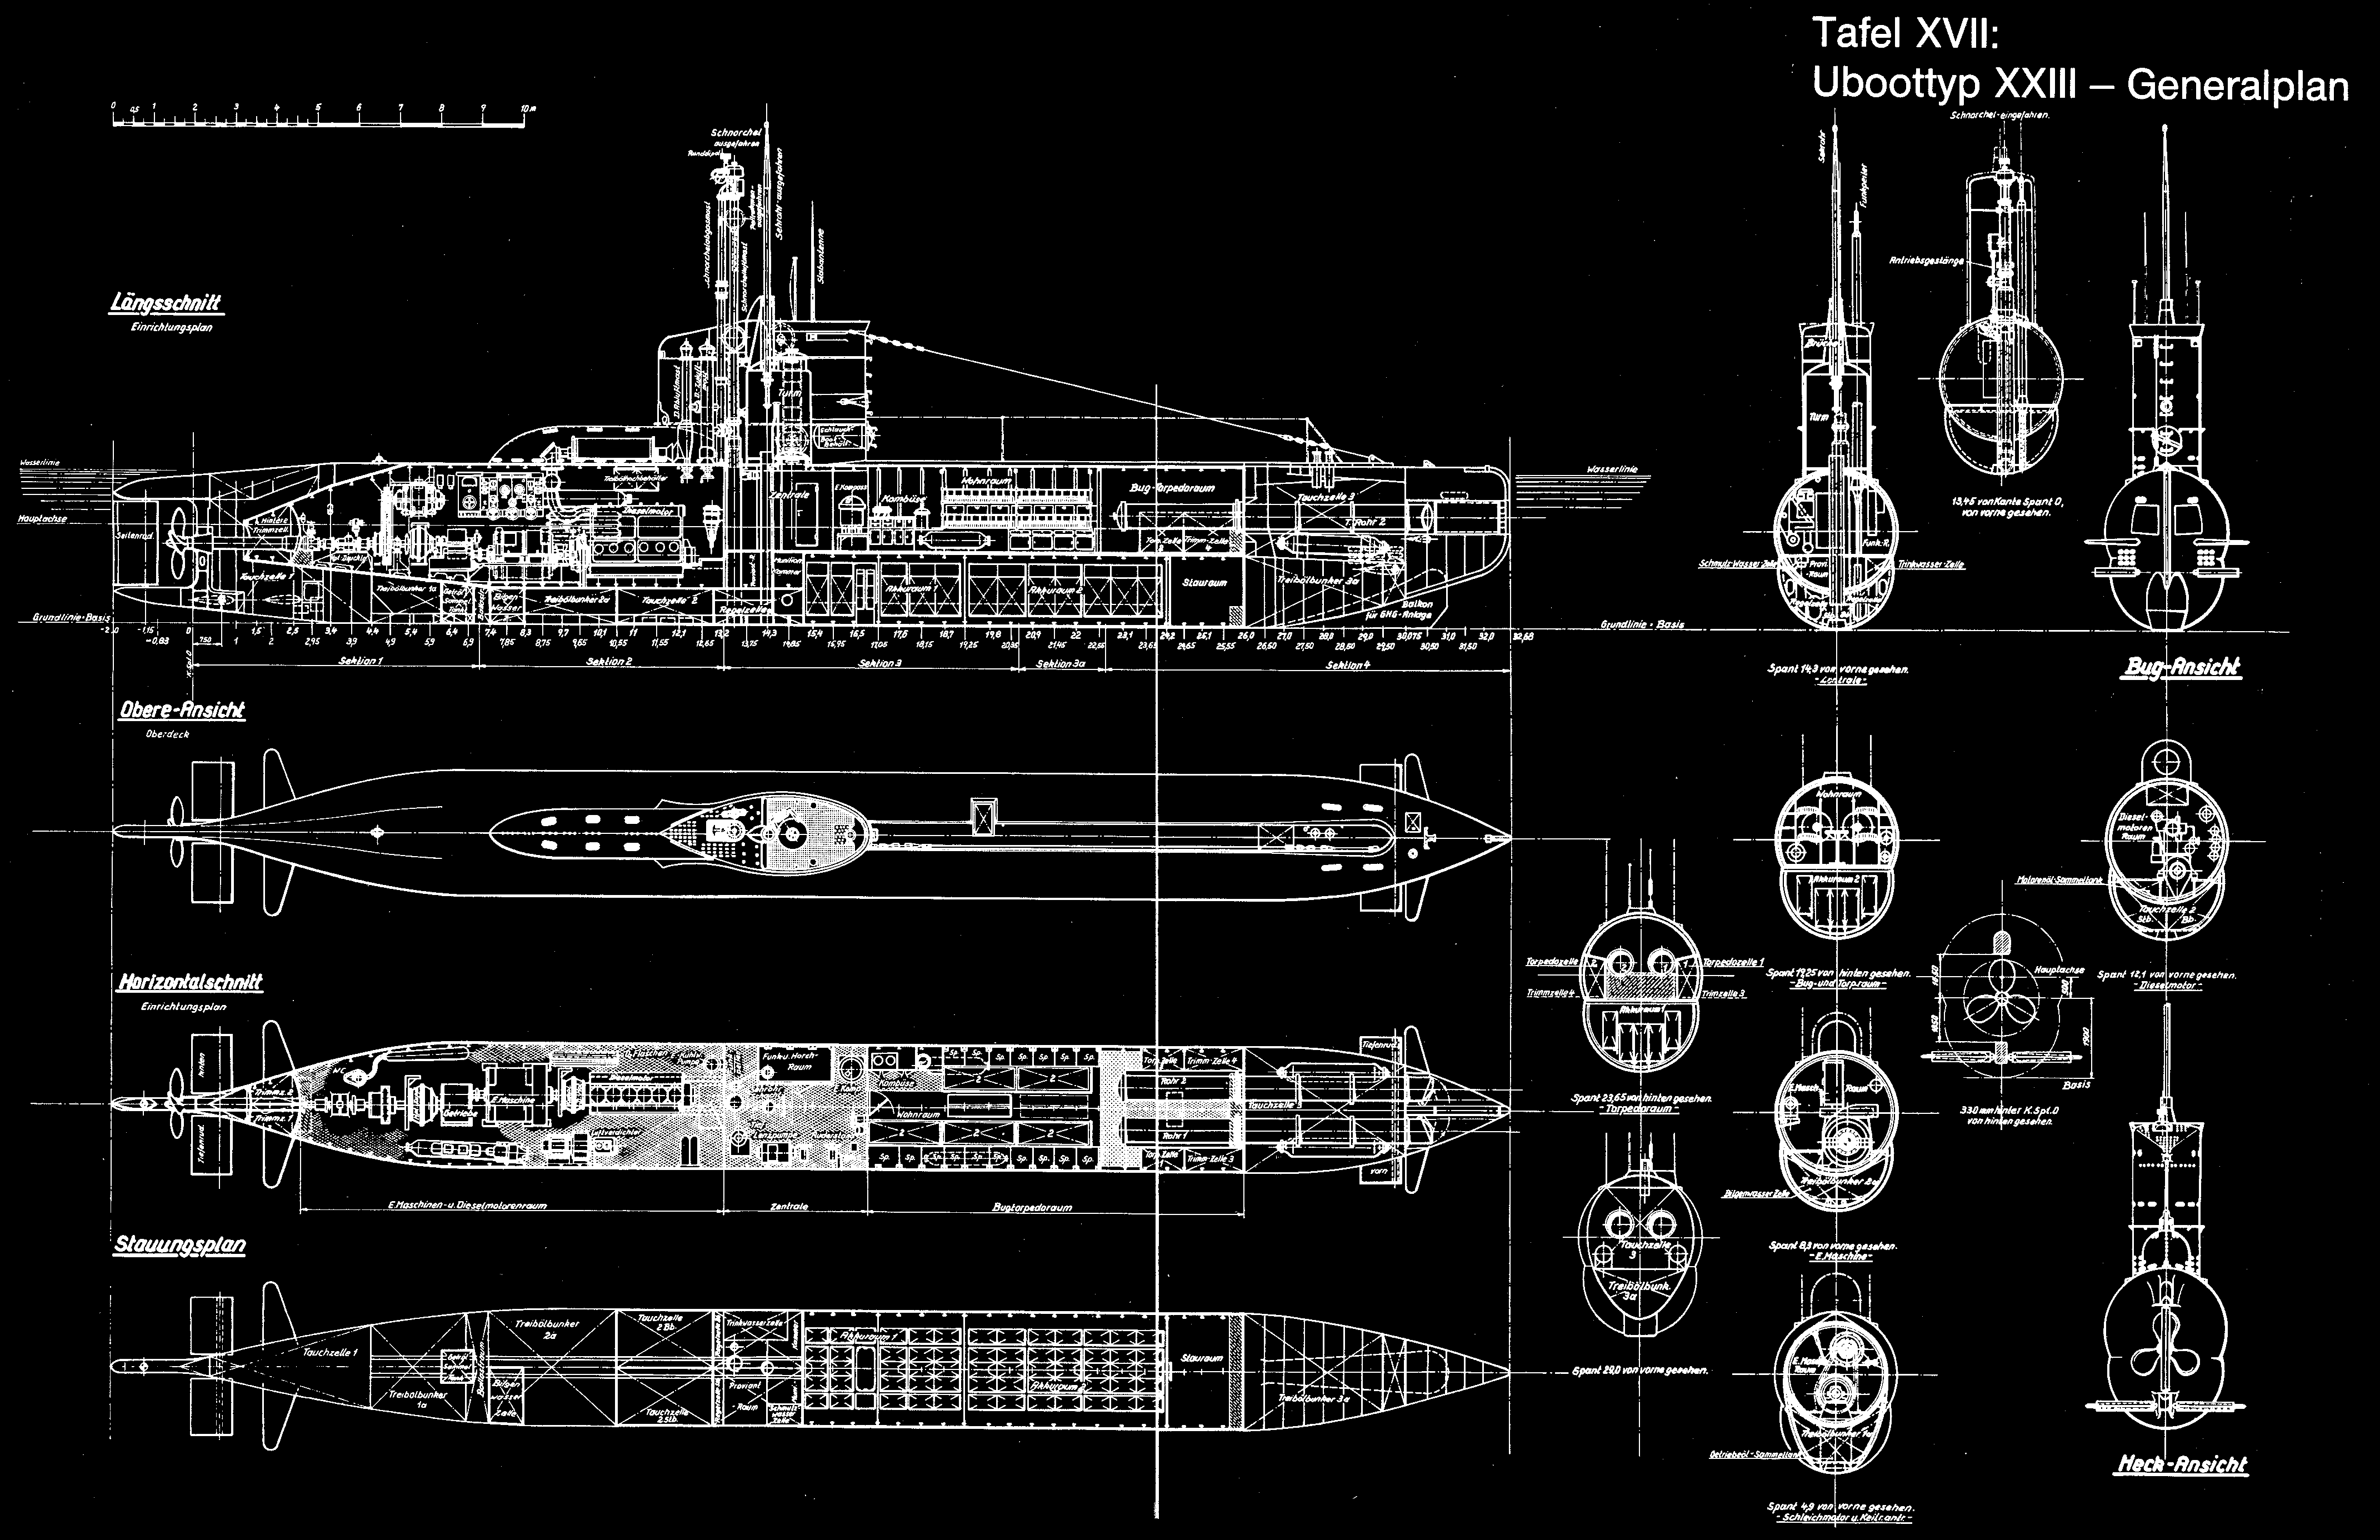 Military German Navy HD Wallpaper | Background Image